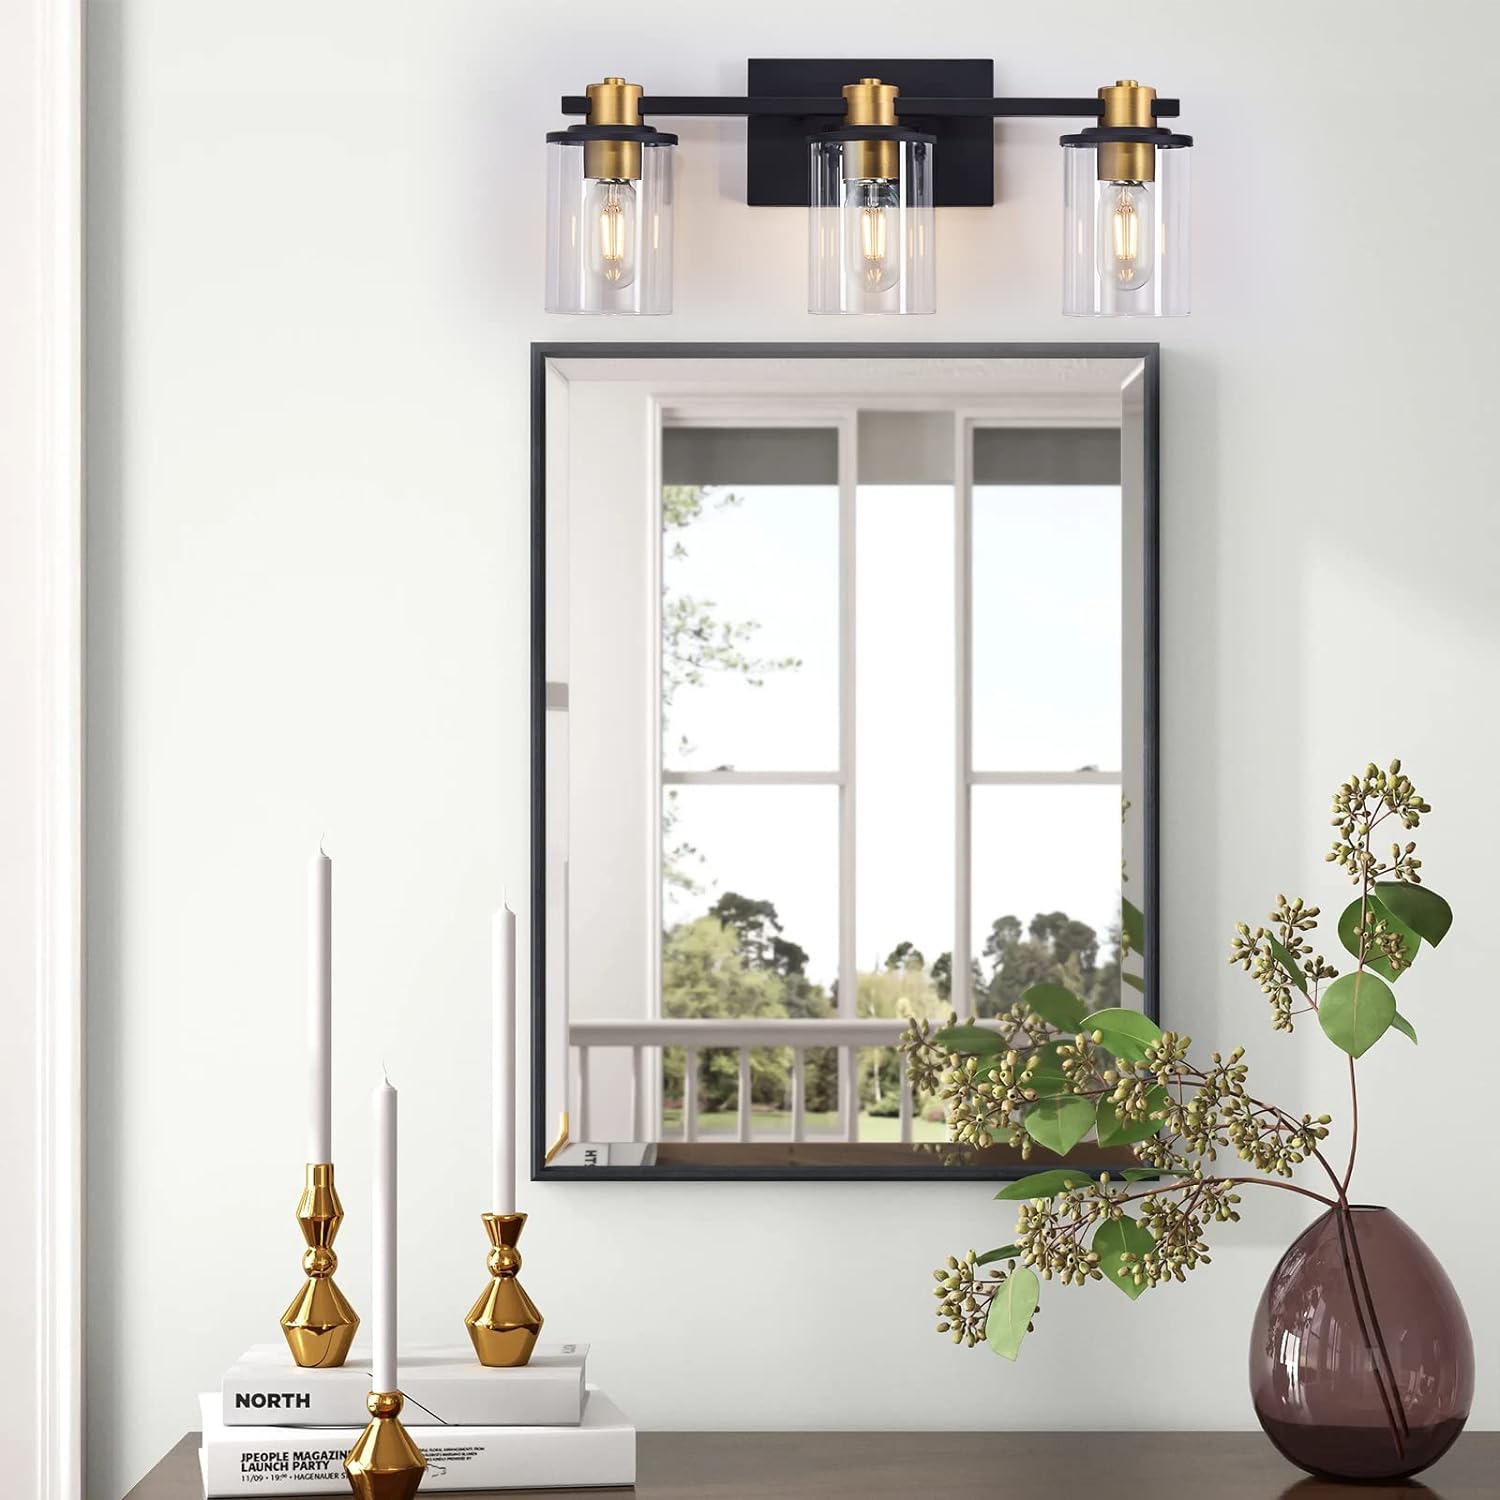 Atocif 3 Light Bathroom Vanity Light Fixtures, Black and Gold Vanity Light Above Mirror with Clear Glass Shade, Modern Wall Sconce Bla